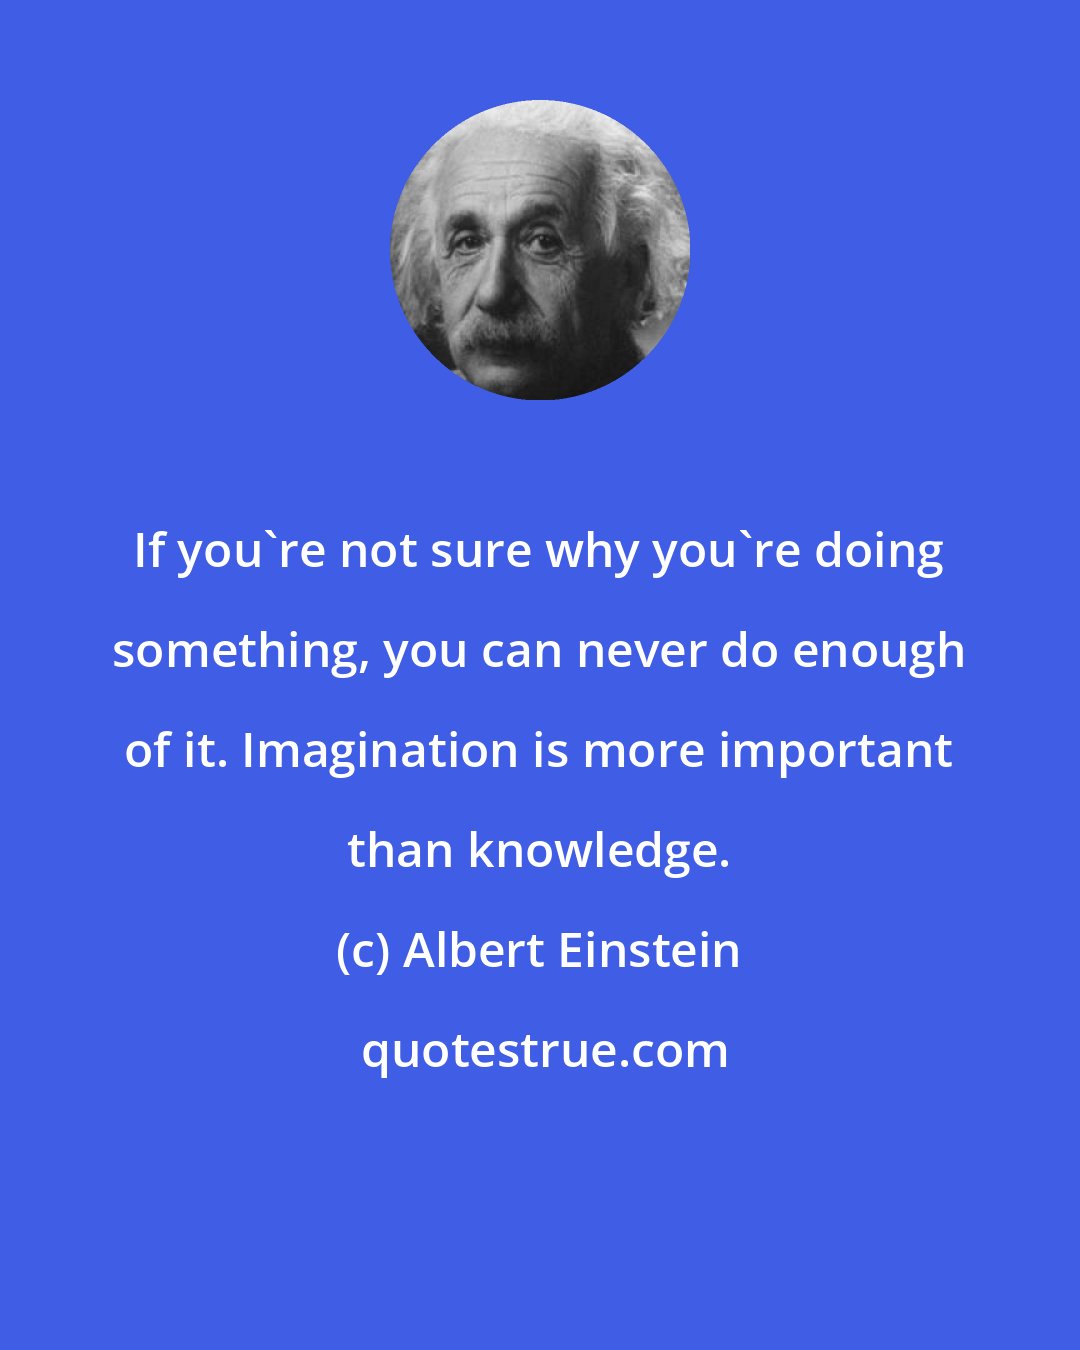 Albert Einstein: If you're not sure why you're doing something, you can never do enough of it. Imagination is more important than knowledge.